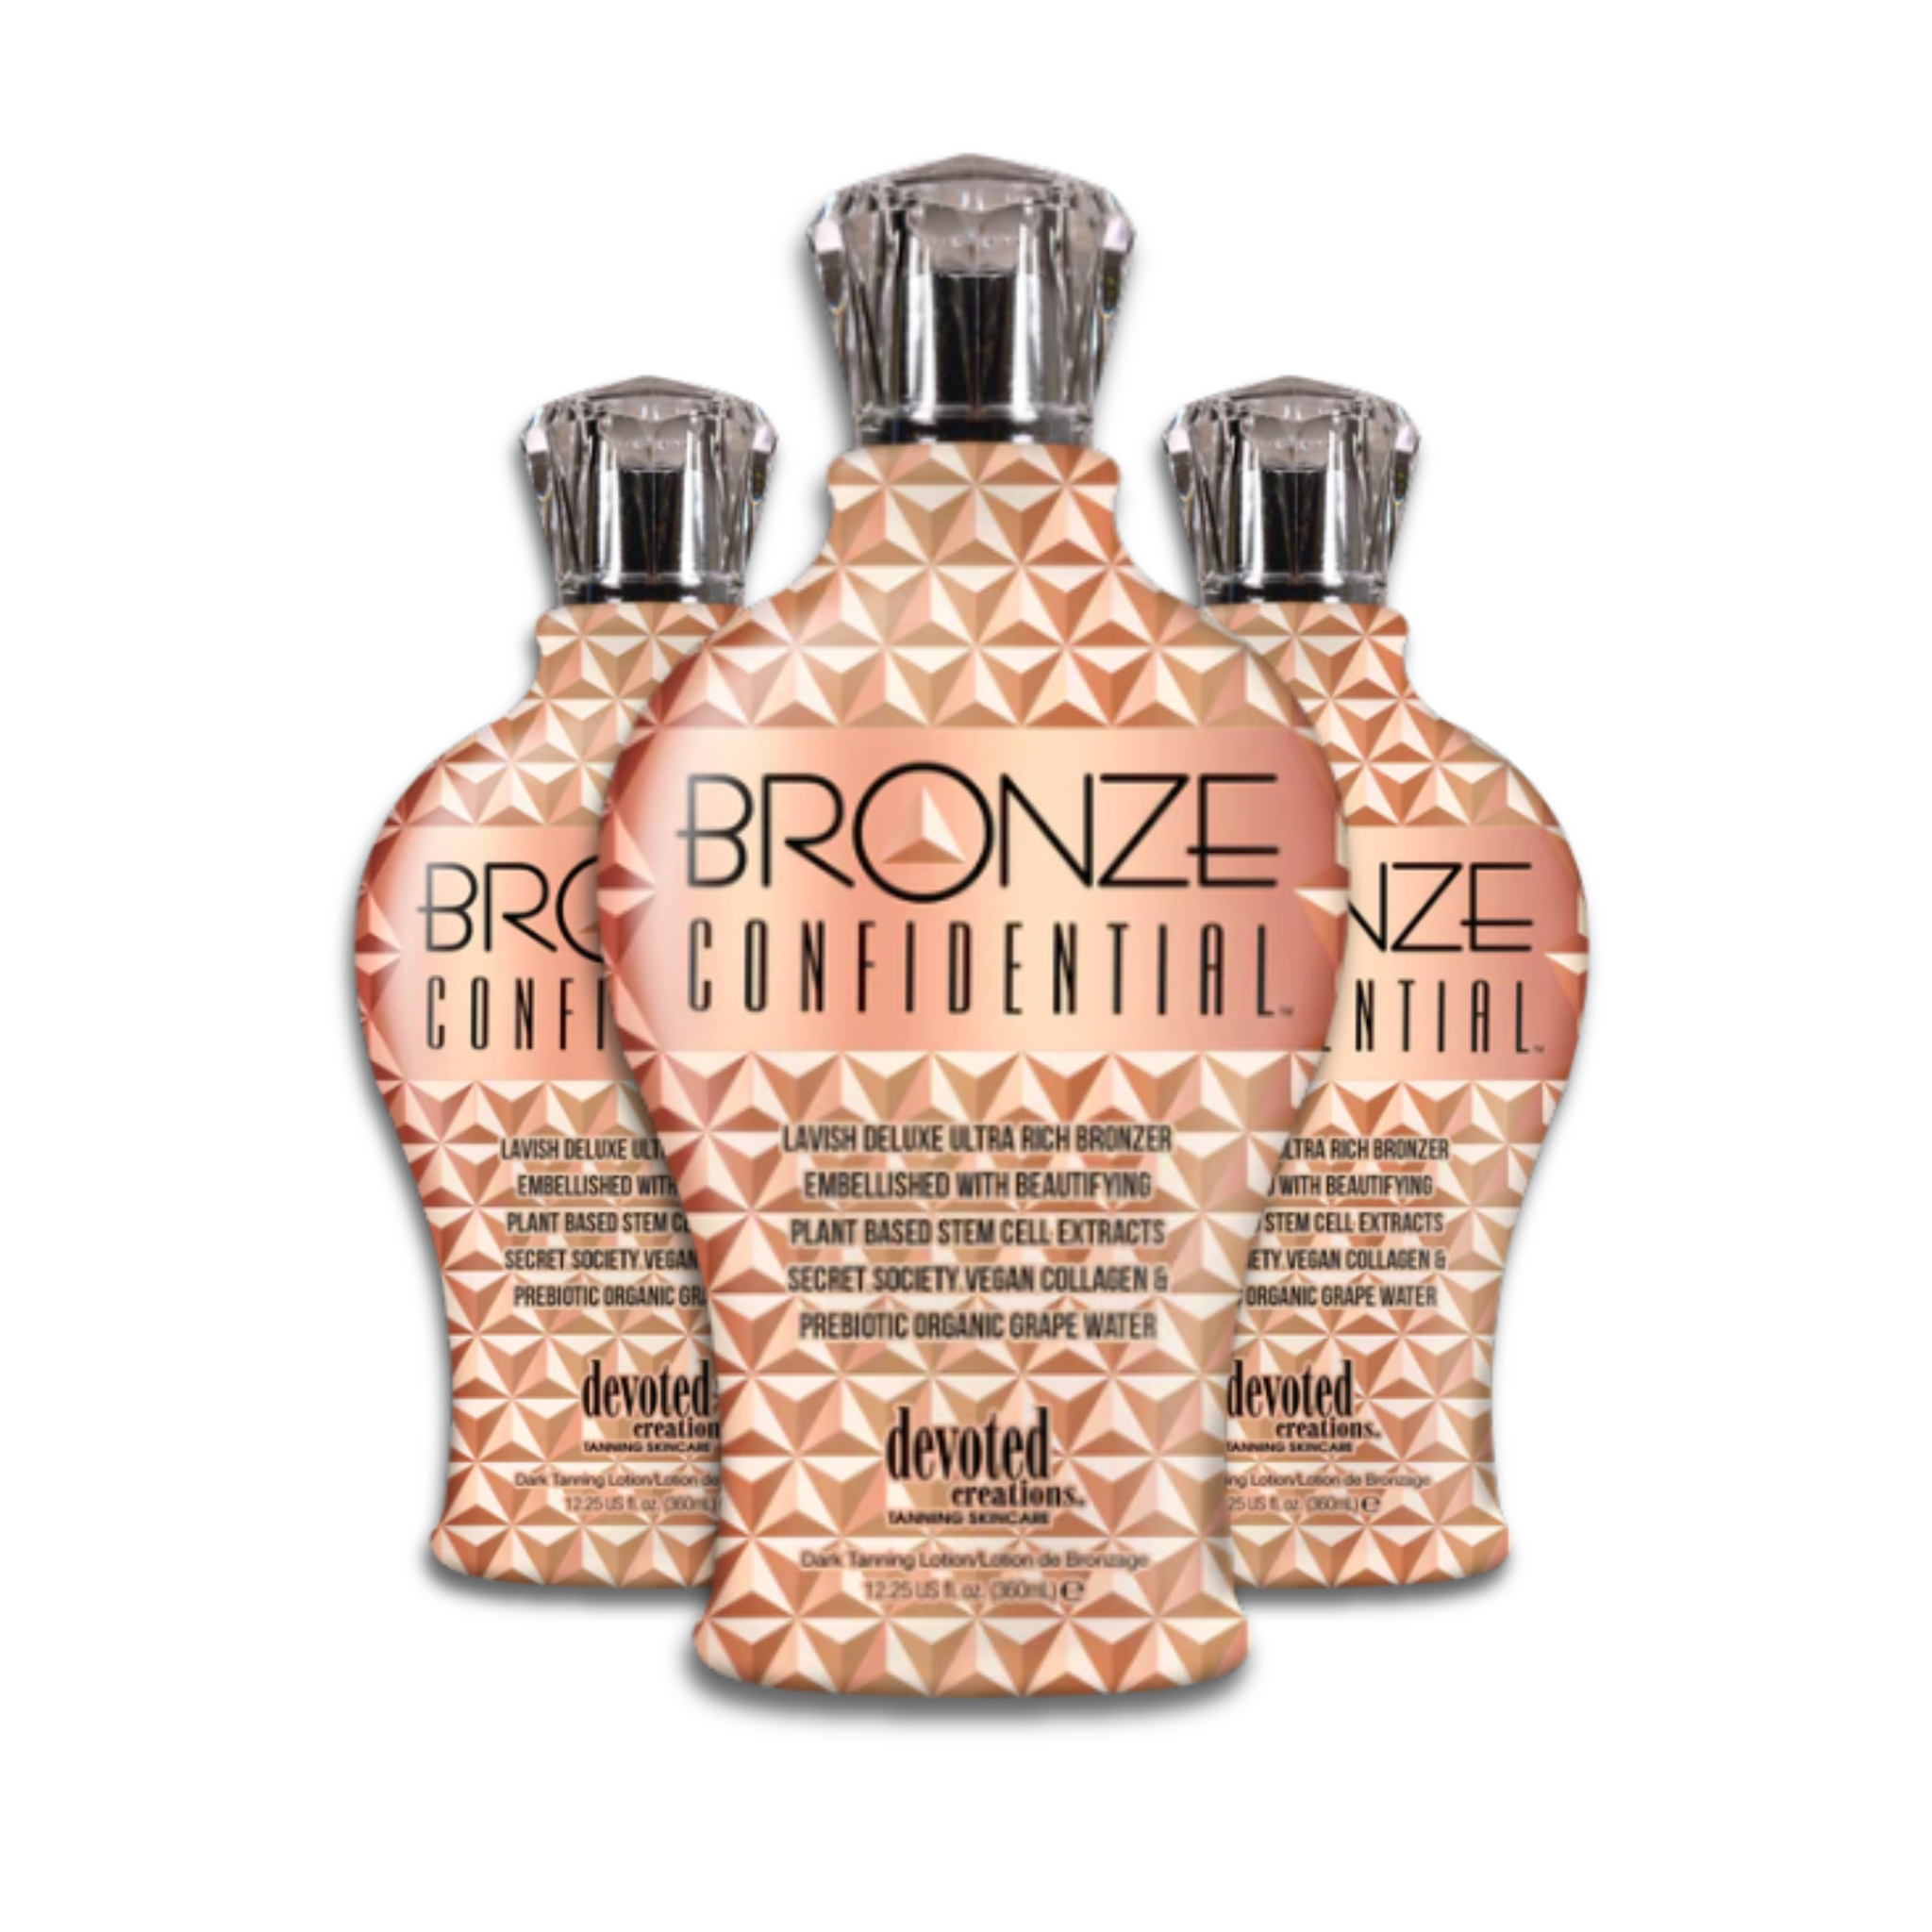 Devoted Creations Bronze Confidential Discount Packs